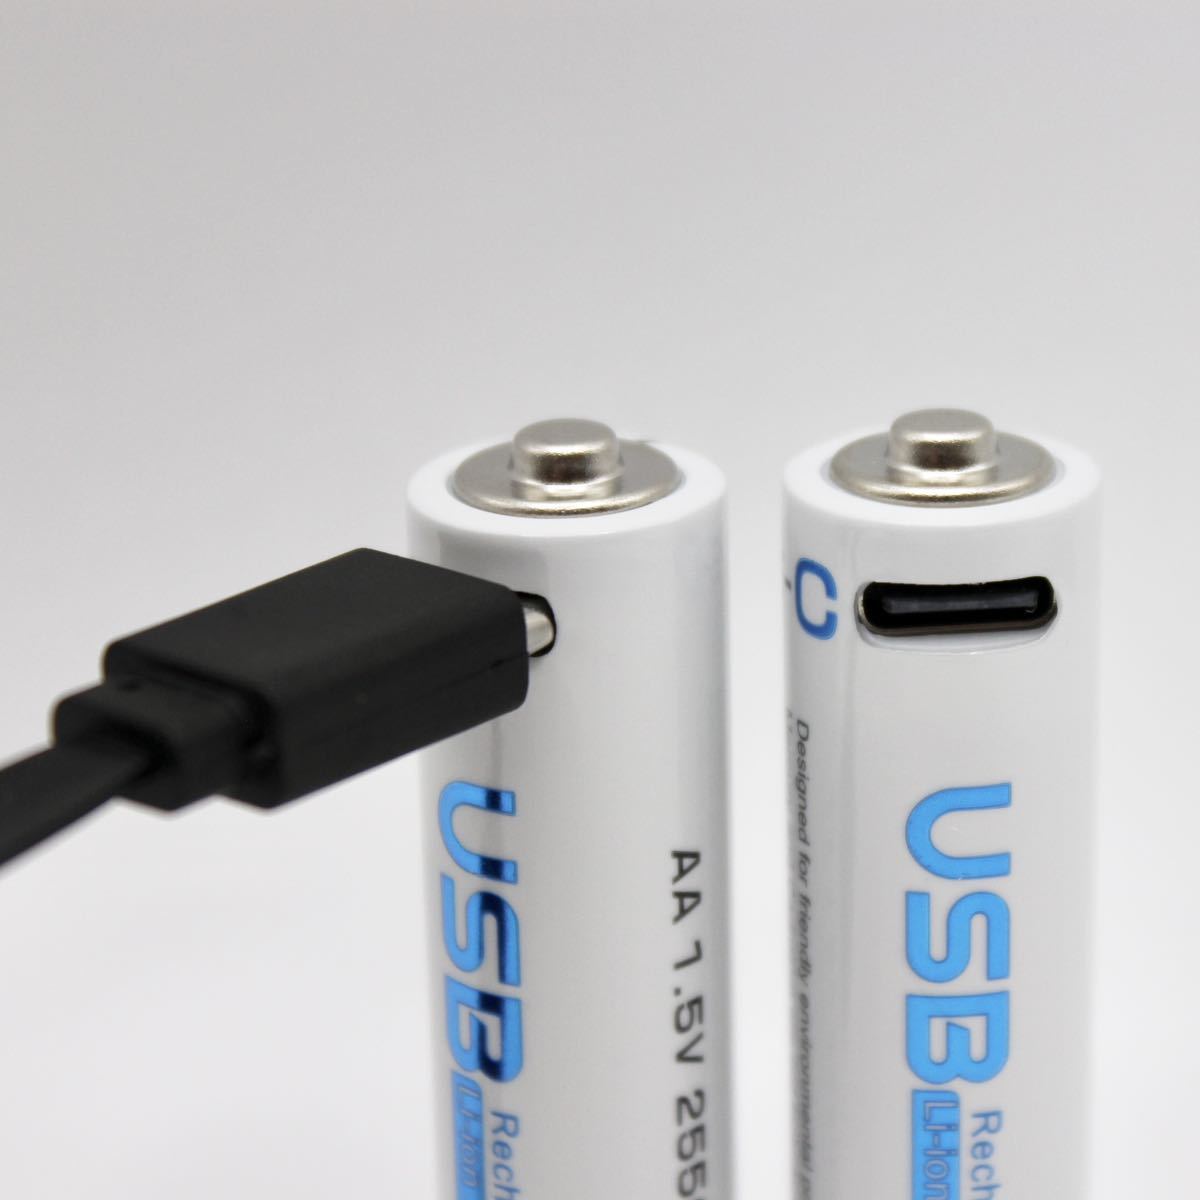  height performance USB type C rechargeable AA battery 2 pcs set (PSE Mark attaching )